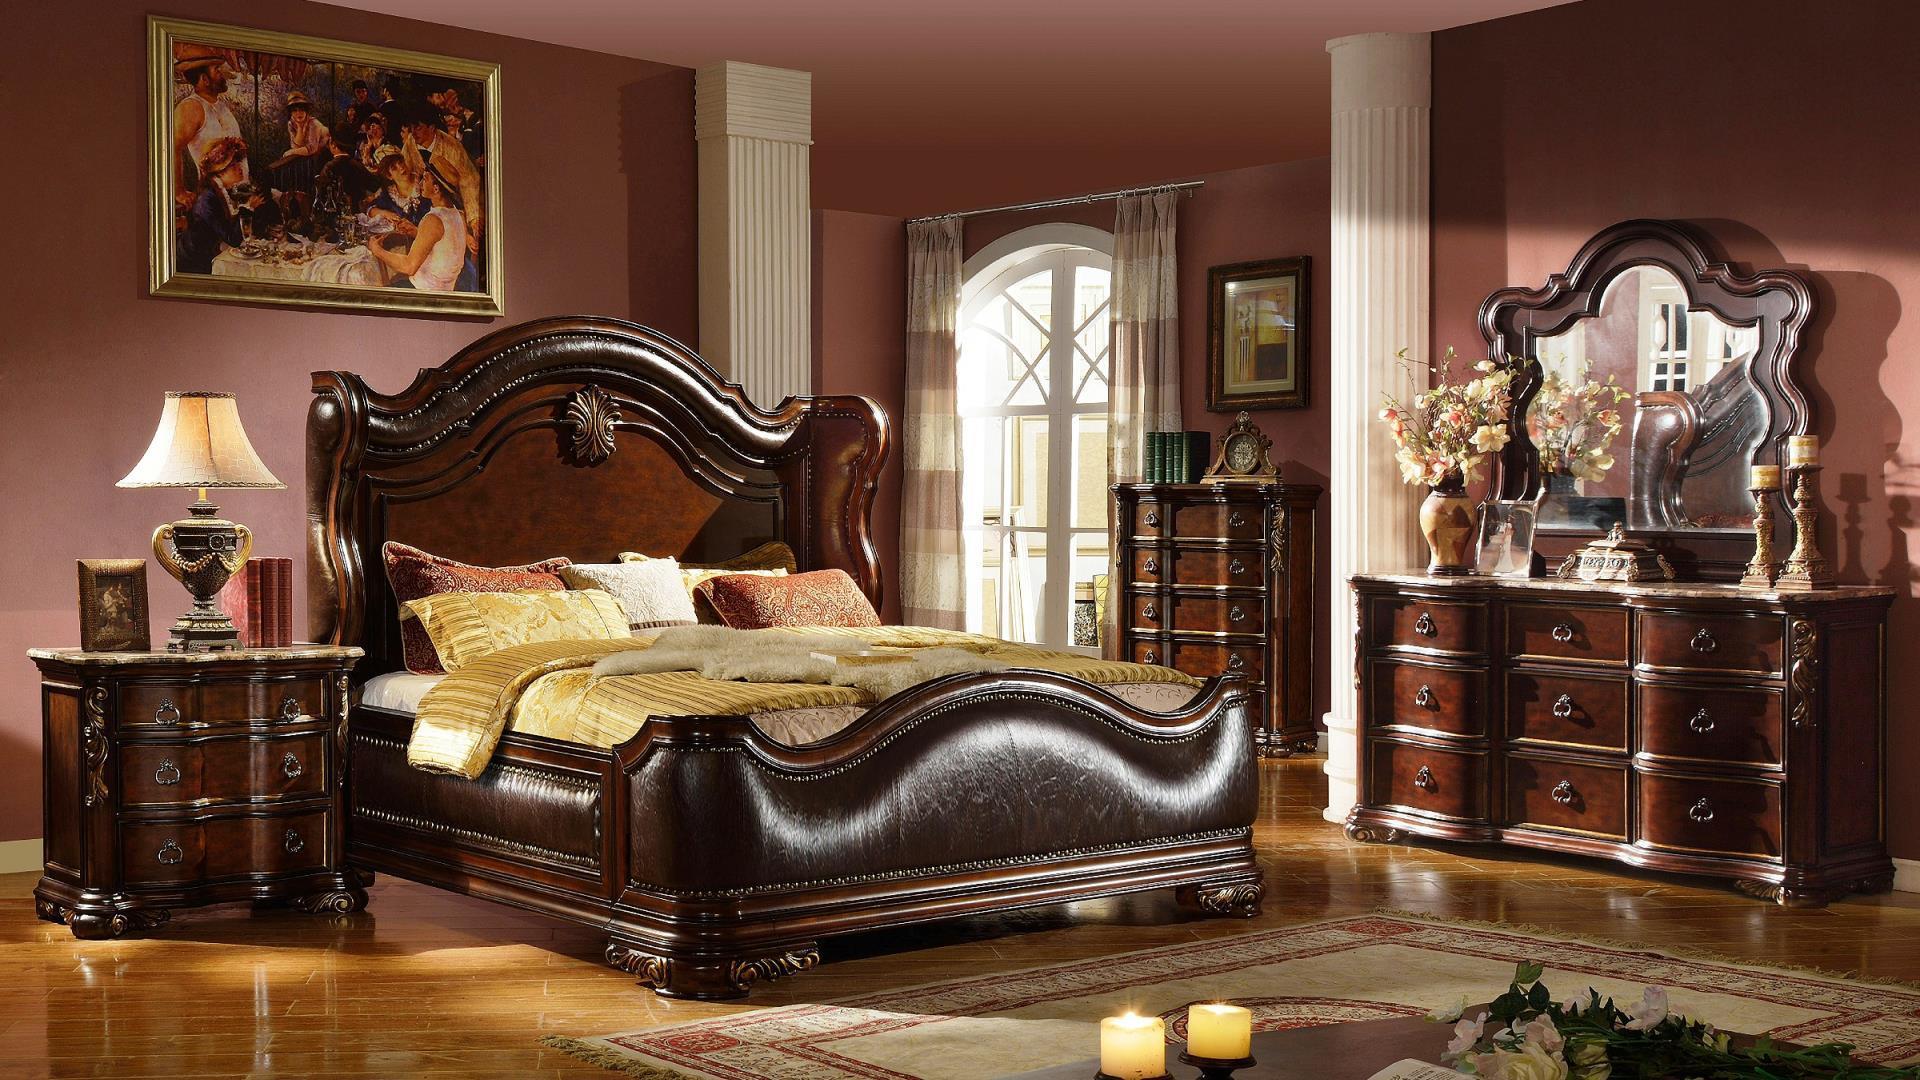 

    
Royal Dark Walnut Carved Wood Queen Bed Set 4Pcs BELLA Galaxy Home Traditional
